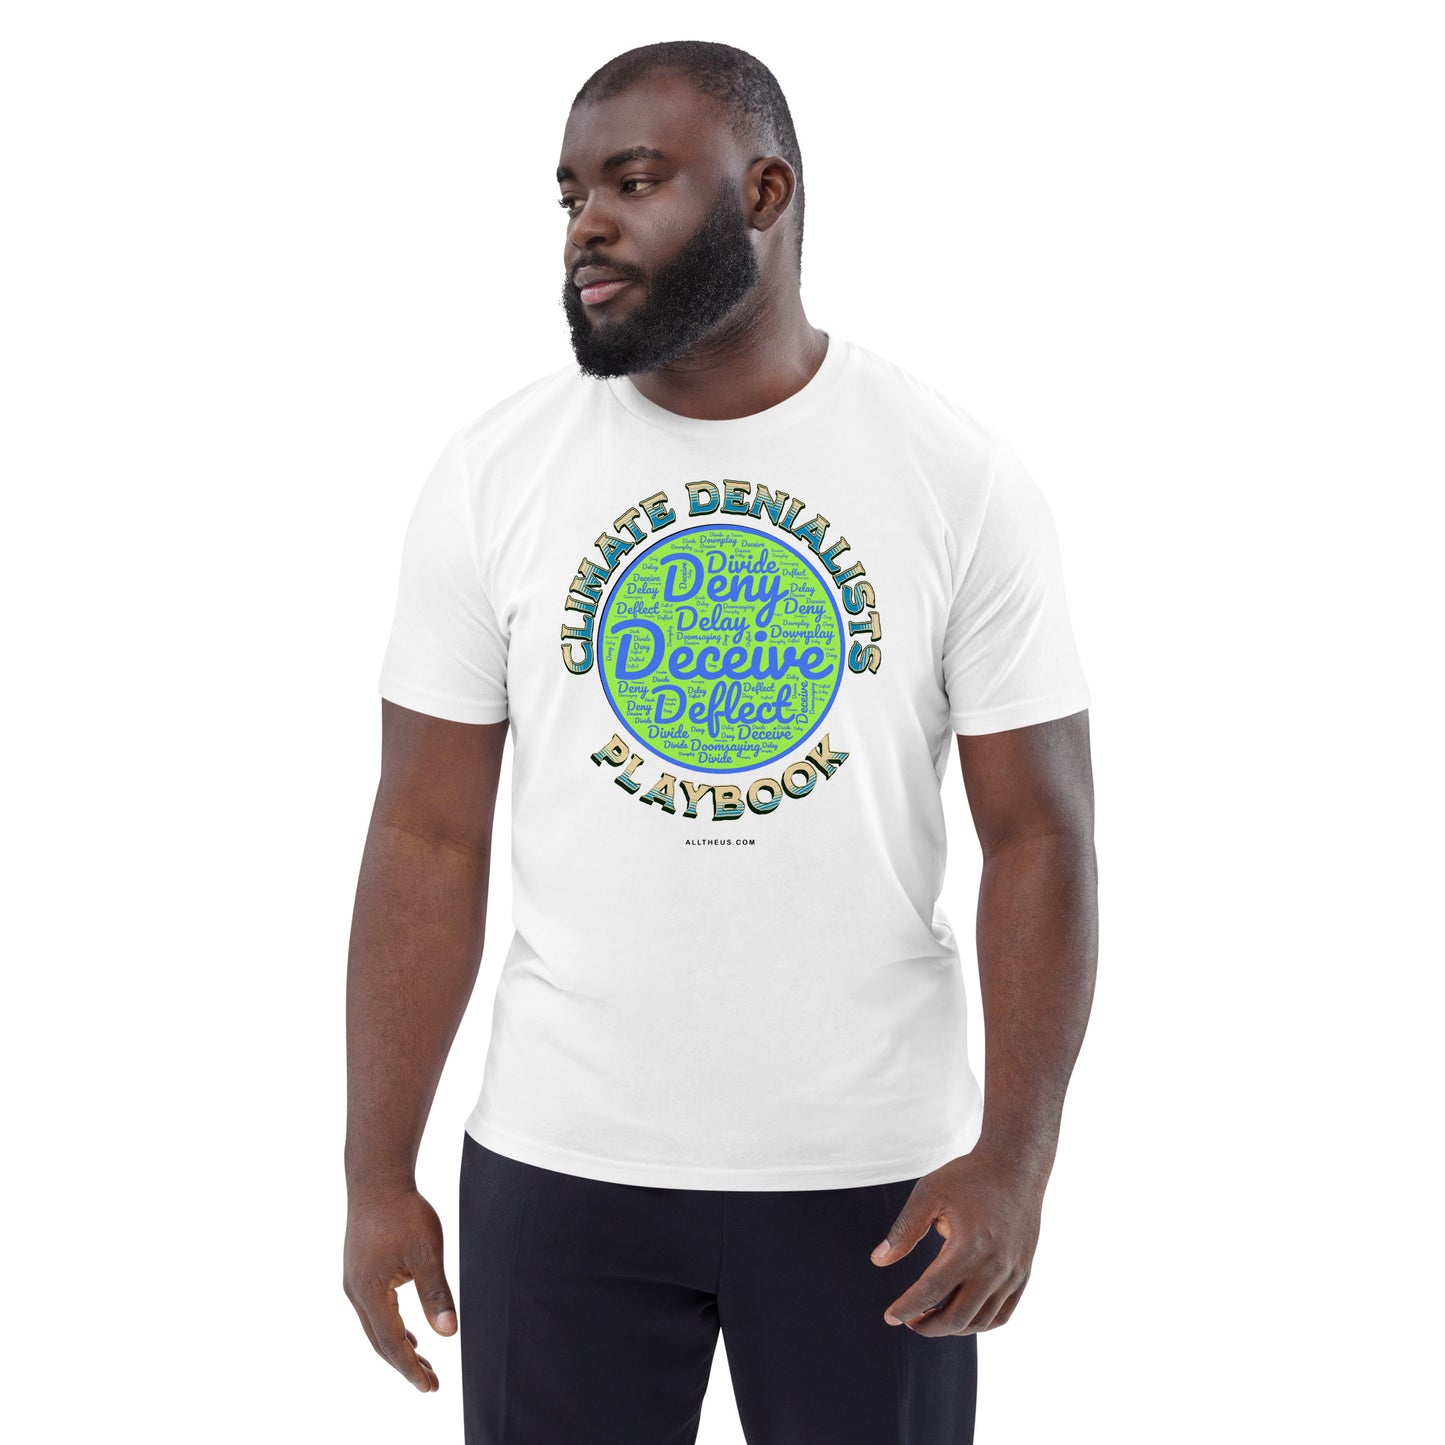 Unisex organic cotton t-shirt - Be Wild About the Climate Change Denialists Playbook